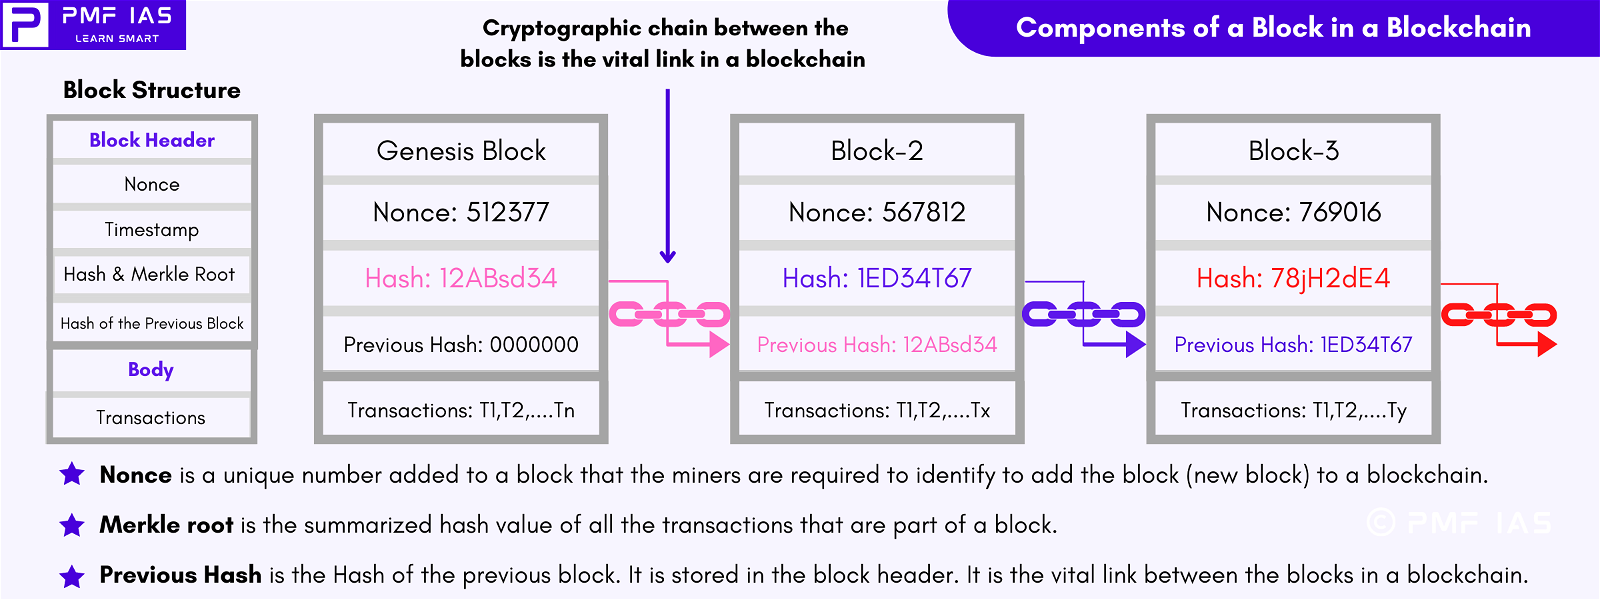 Components of a Block in a Blockchain